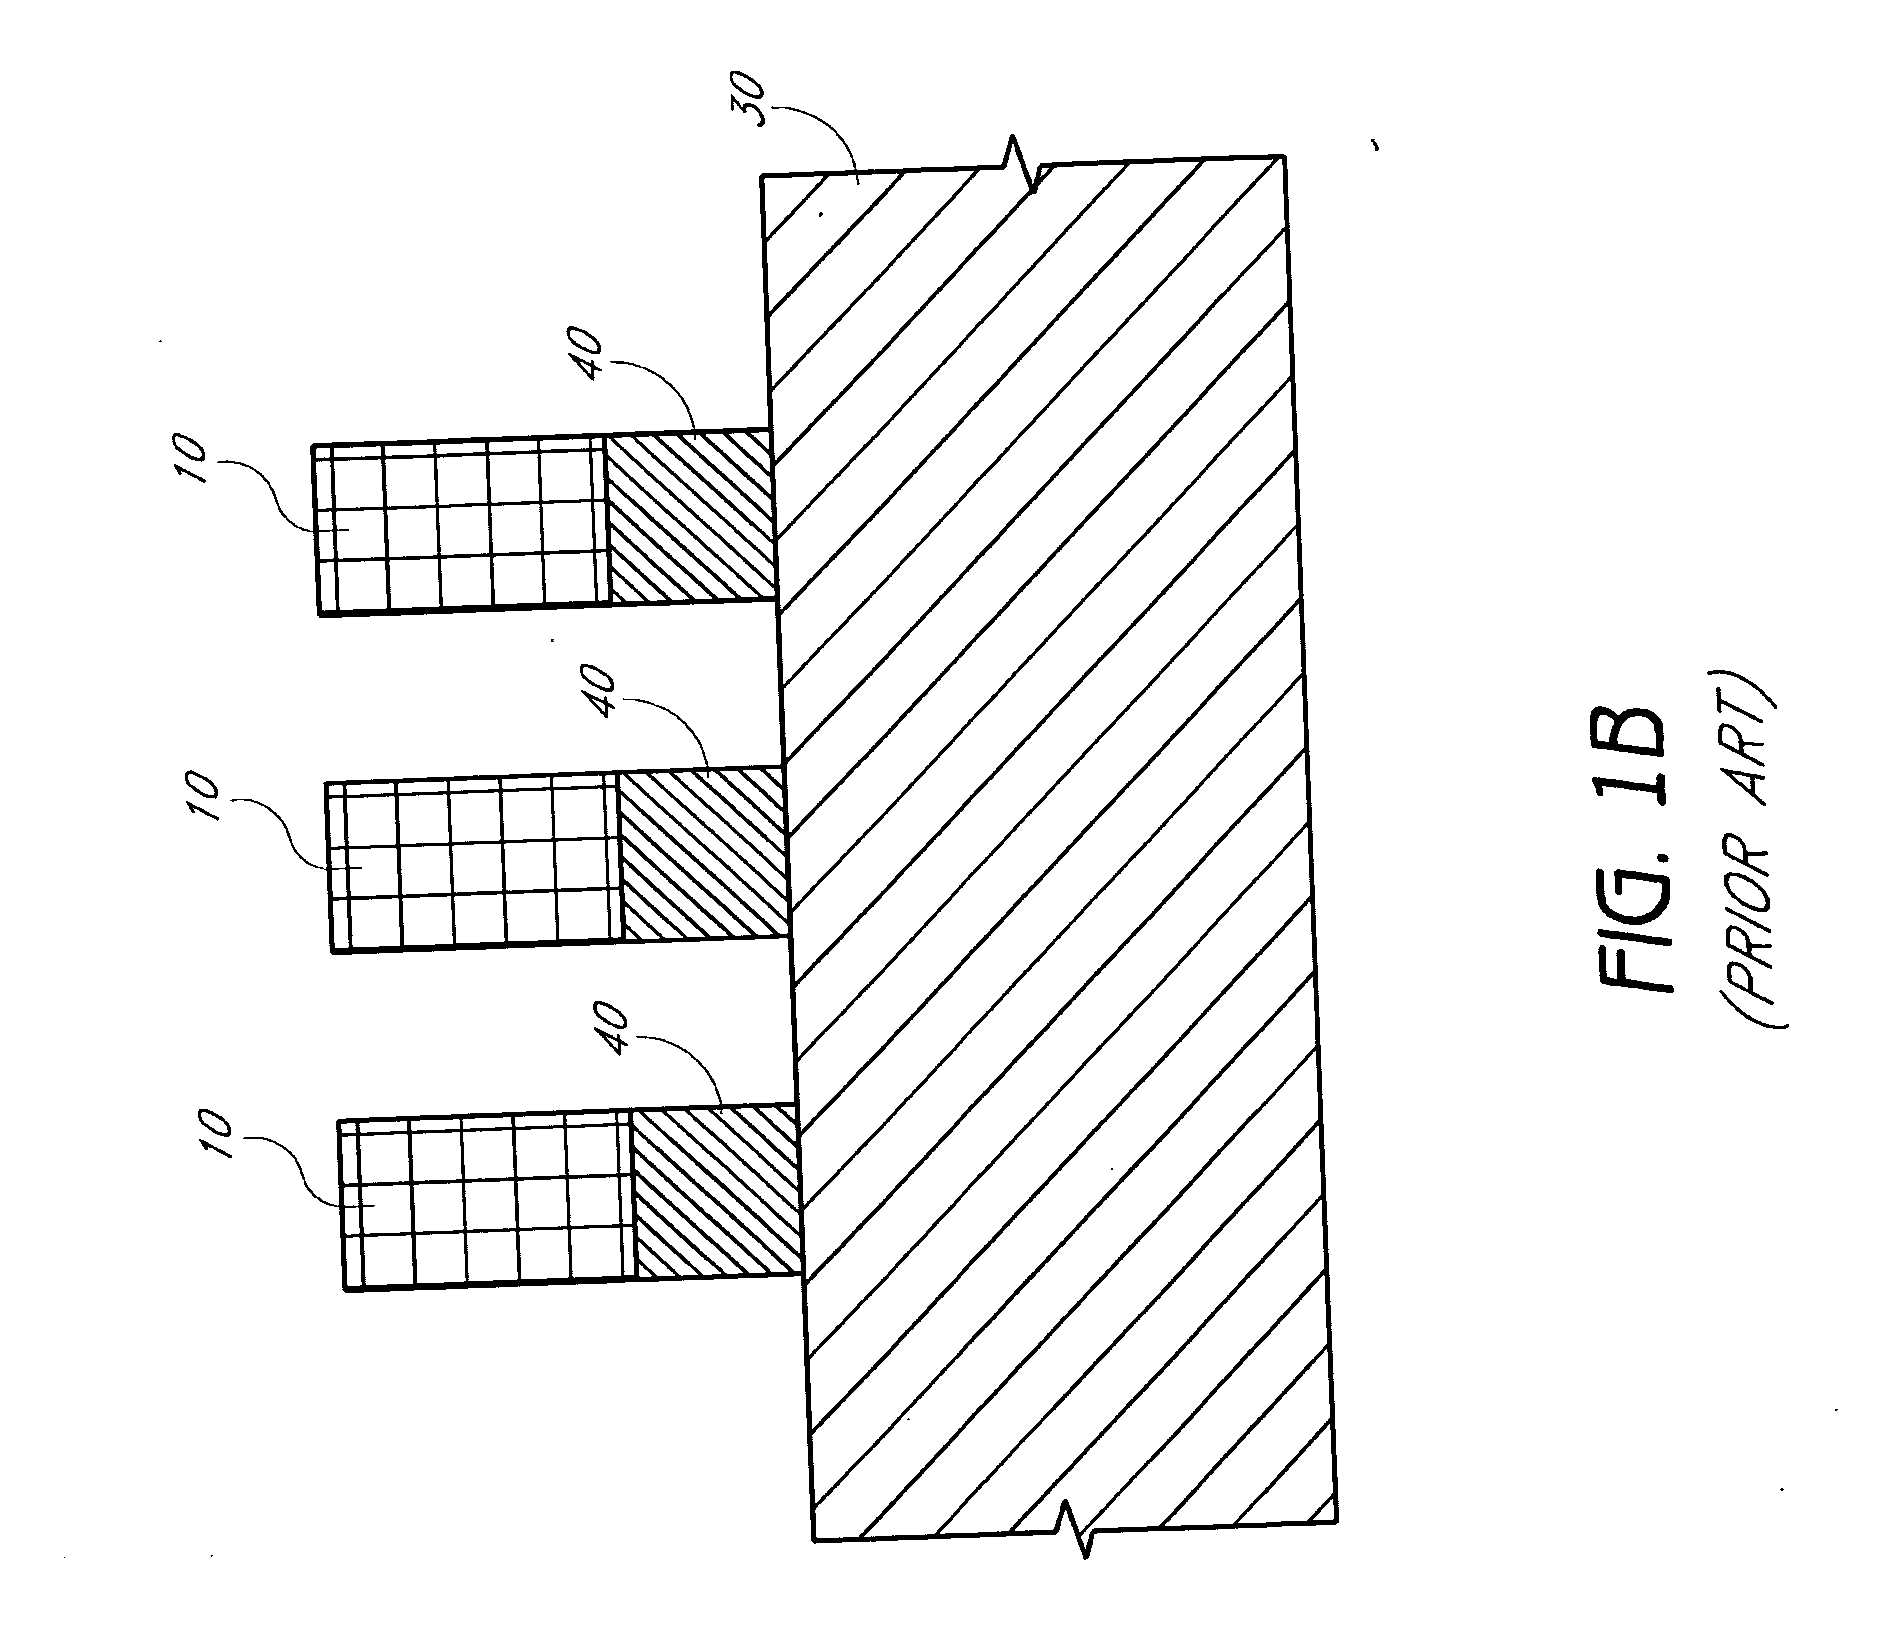 Method of forming pitch multipled contacts